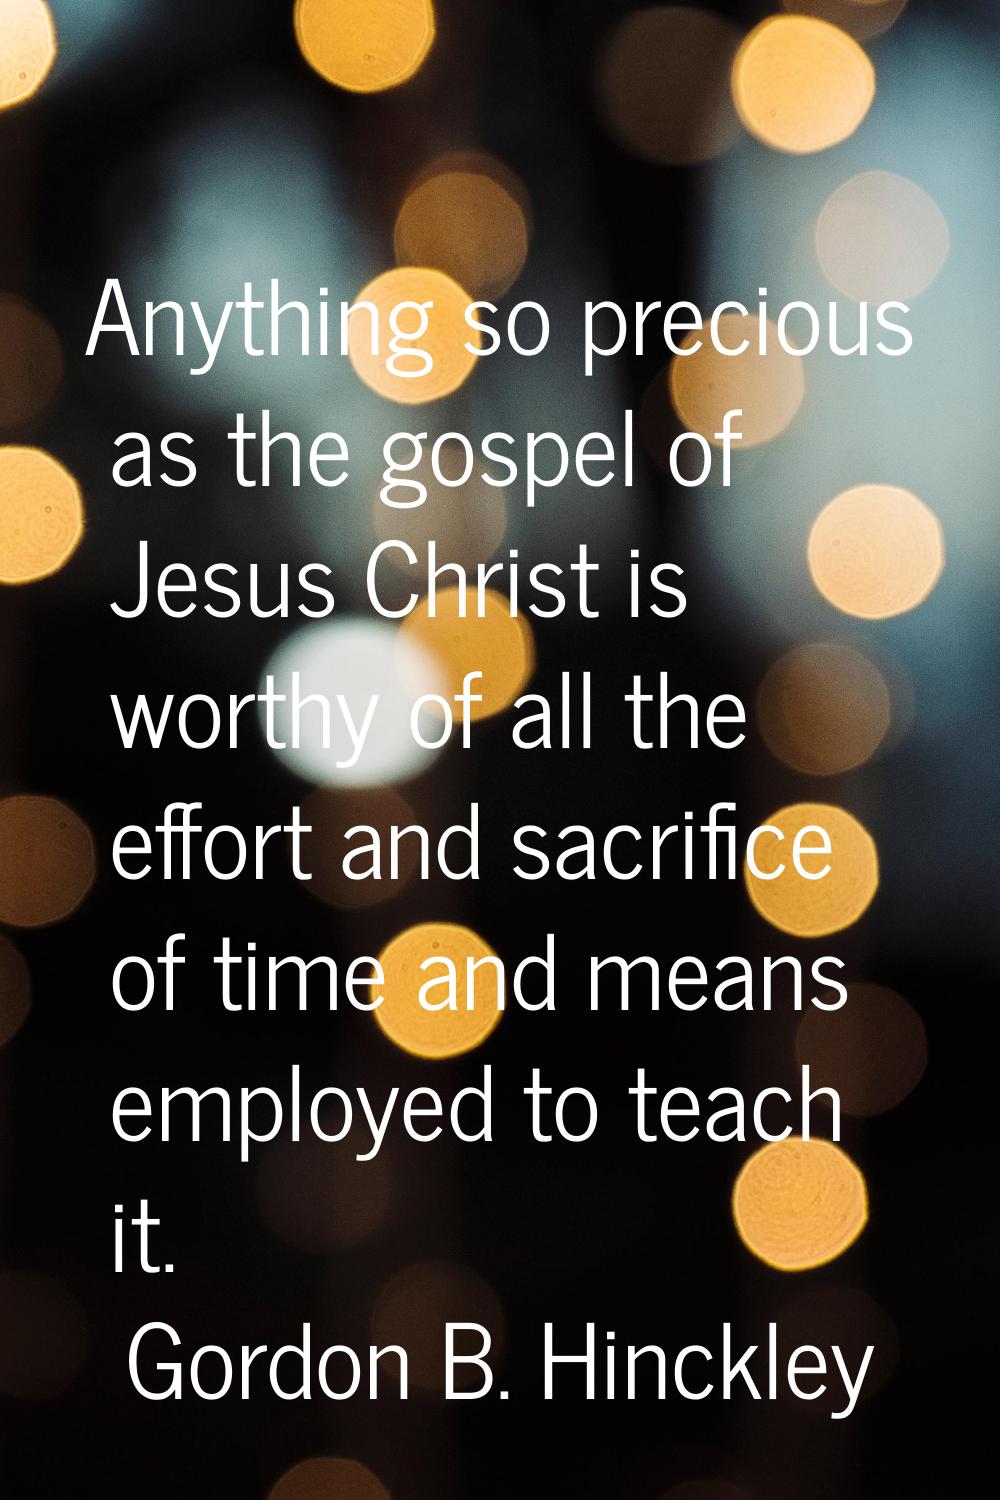 Anything so precious as the gospel of Jesus Christ is worthy of all the effort and sacrifice of tim